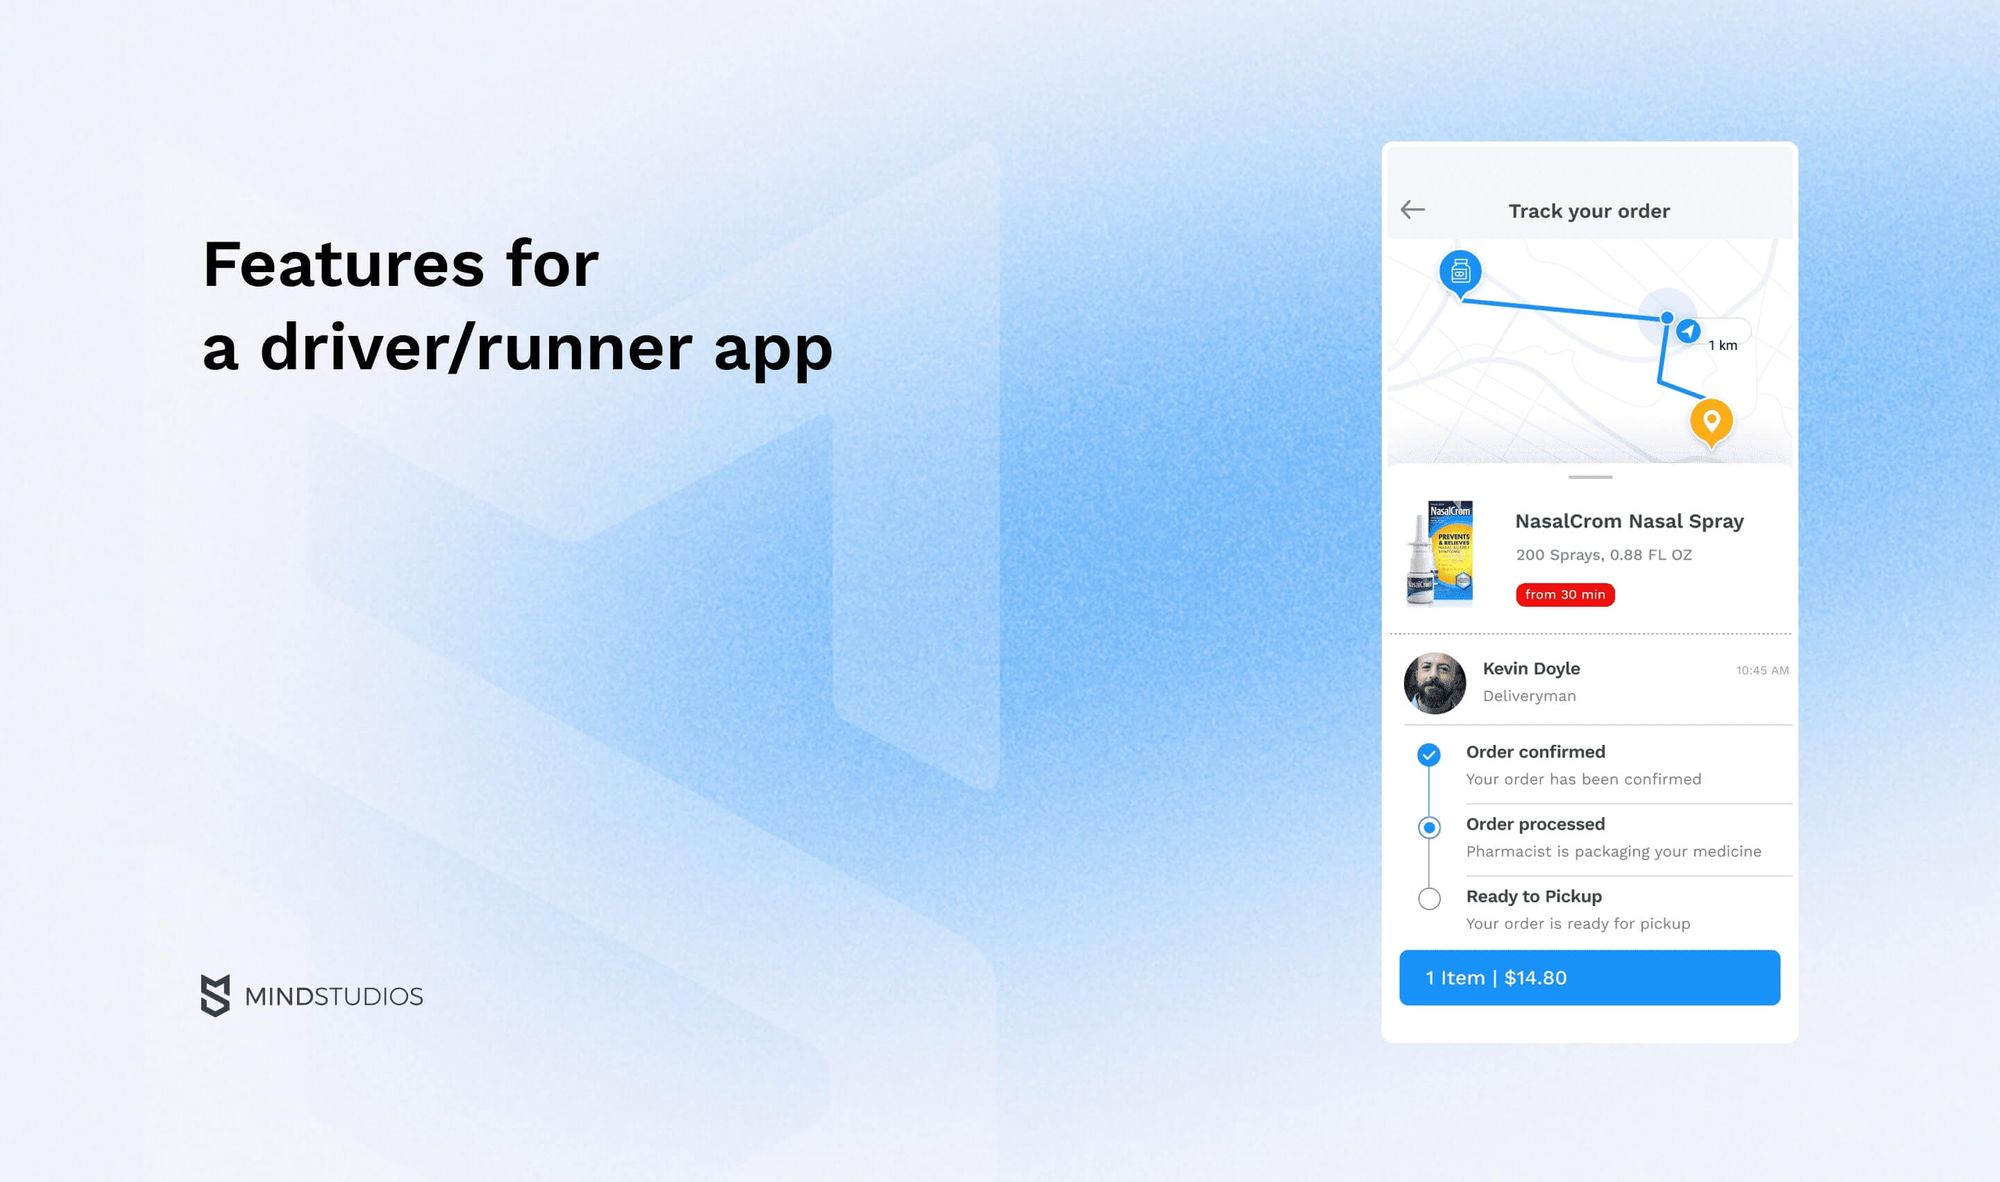 Features for a driver/runner app